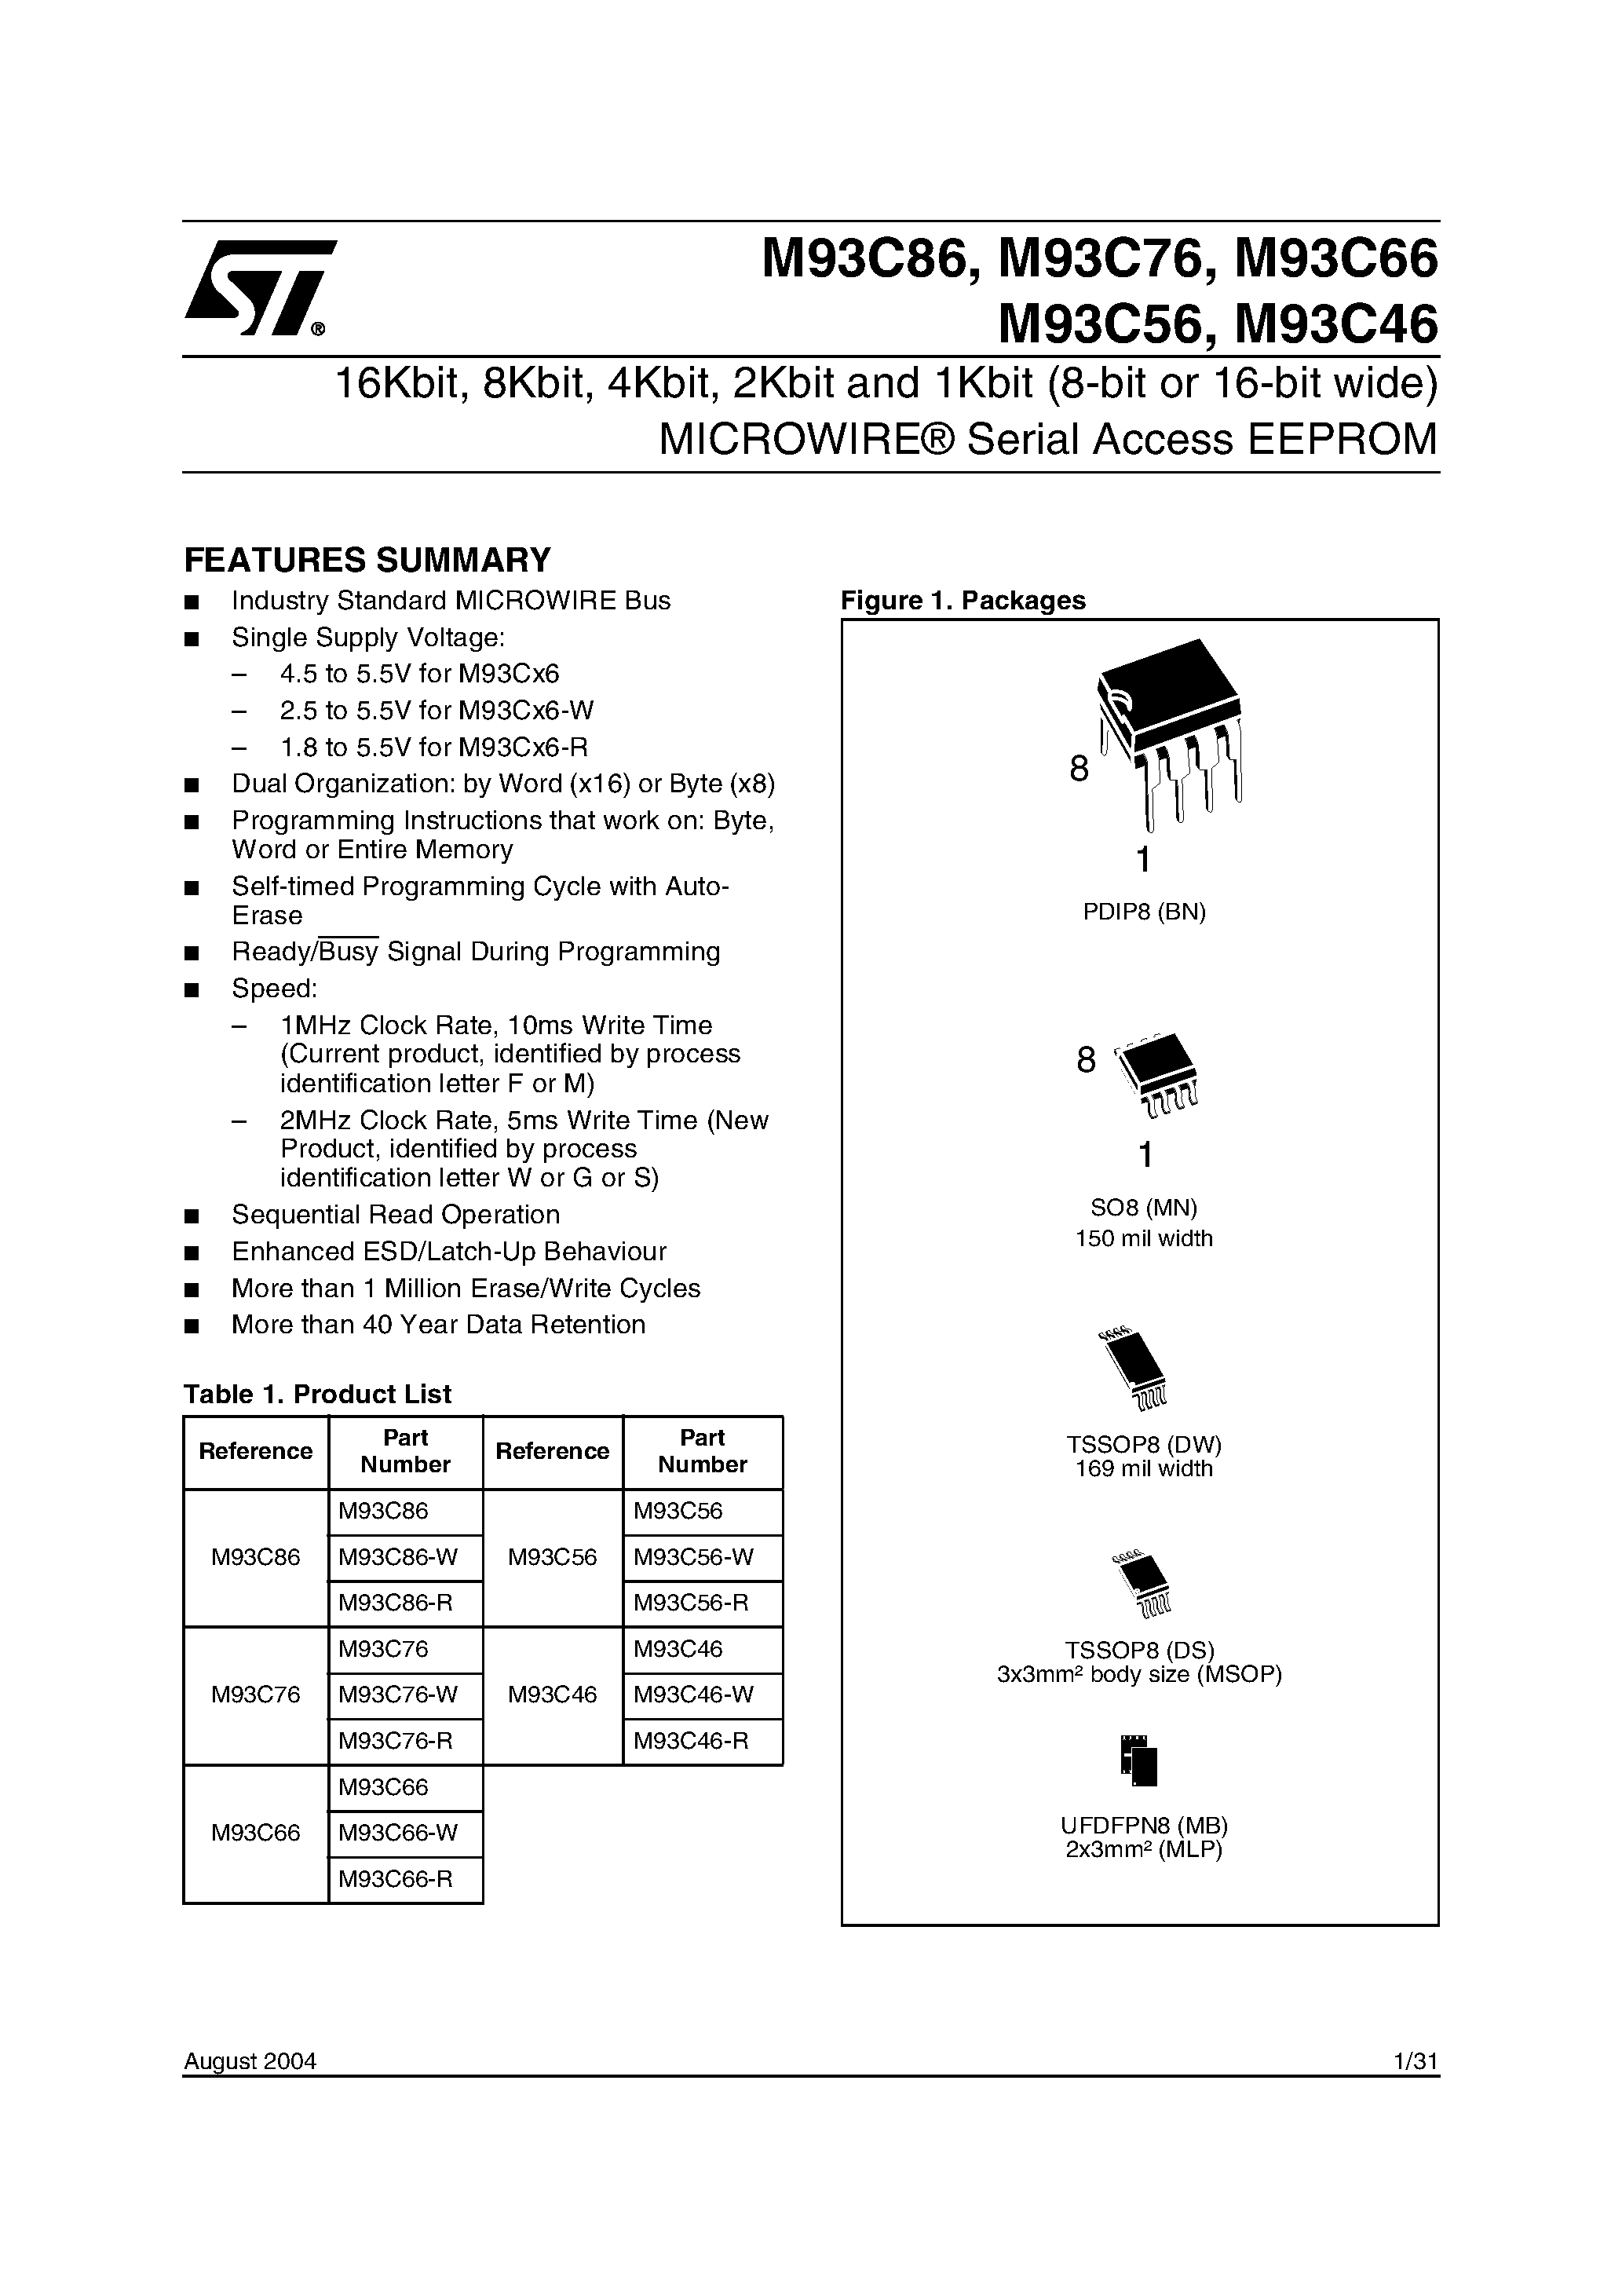 Datasheet M93C76 - 16Kbit / 8Kbit / 4Kbit / 2Kbit / 1Kbit and 256bit 8-bit or 16-bit wide page 1